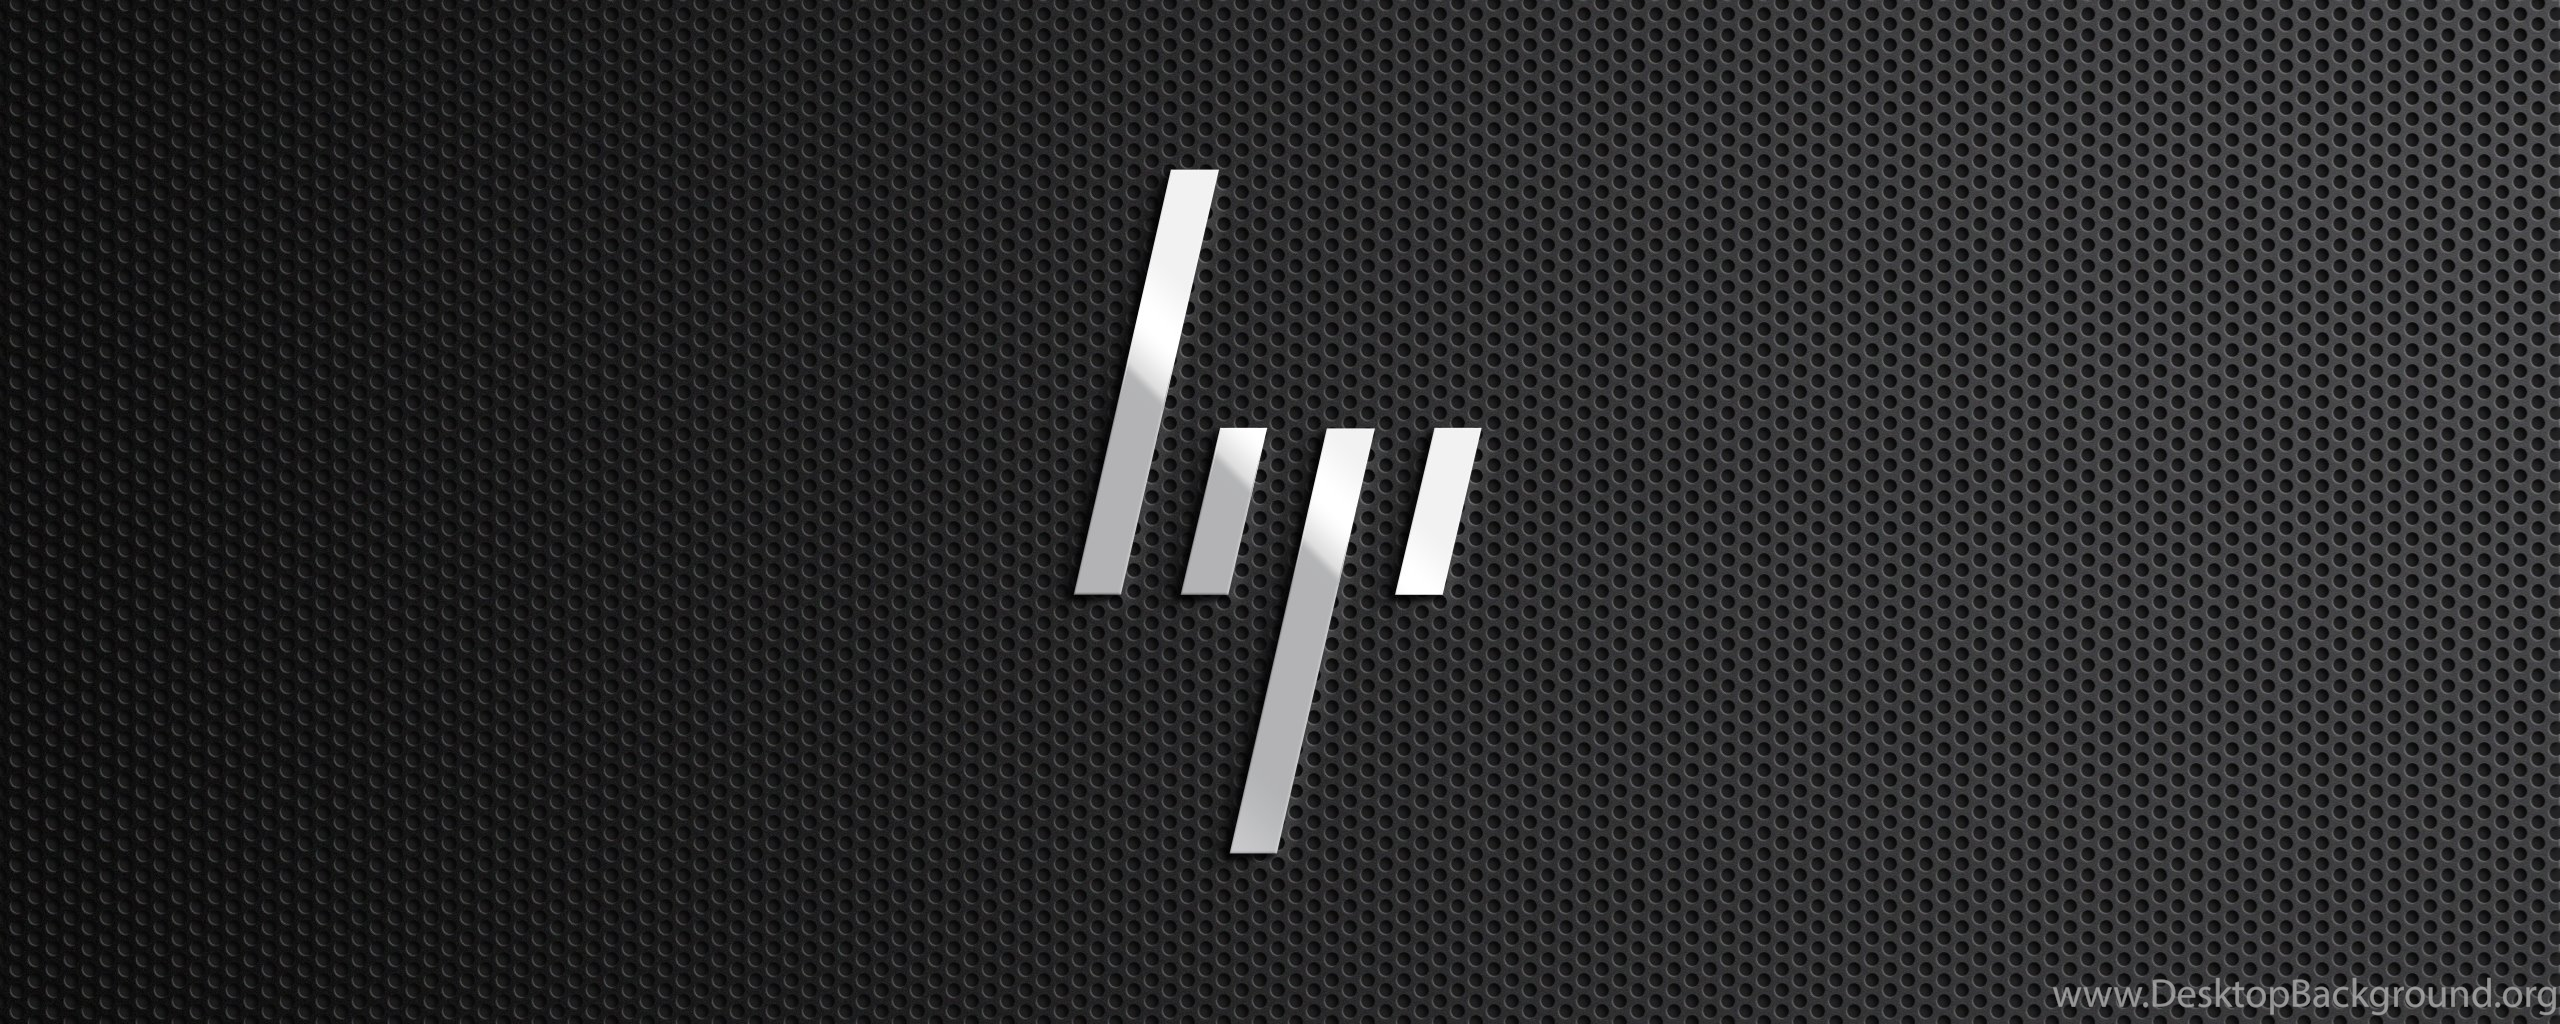 Download DeviantArt: More Like Hp Rebrand Logo Wallpapers Pack + Psd By ......